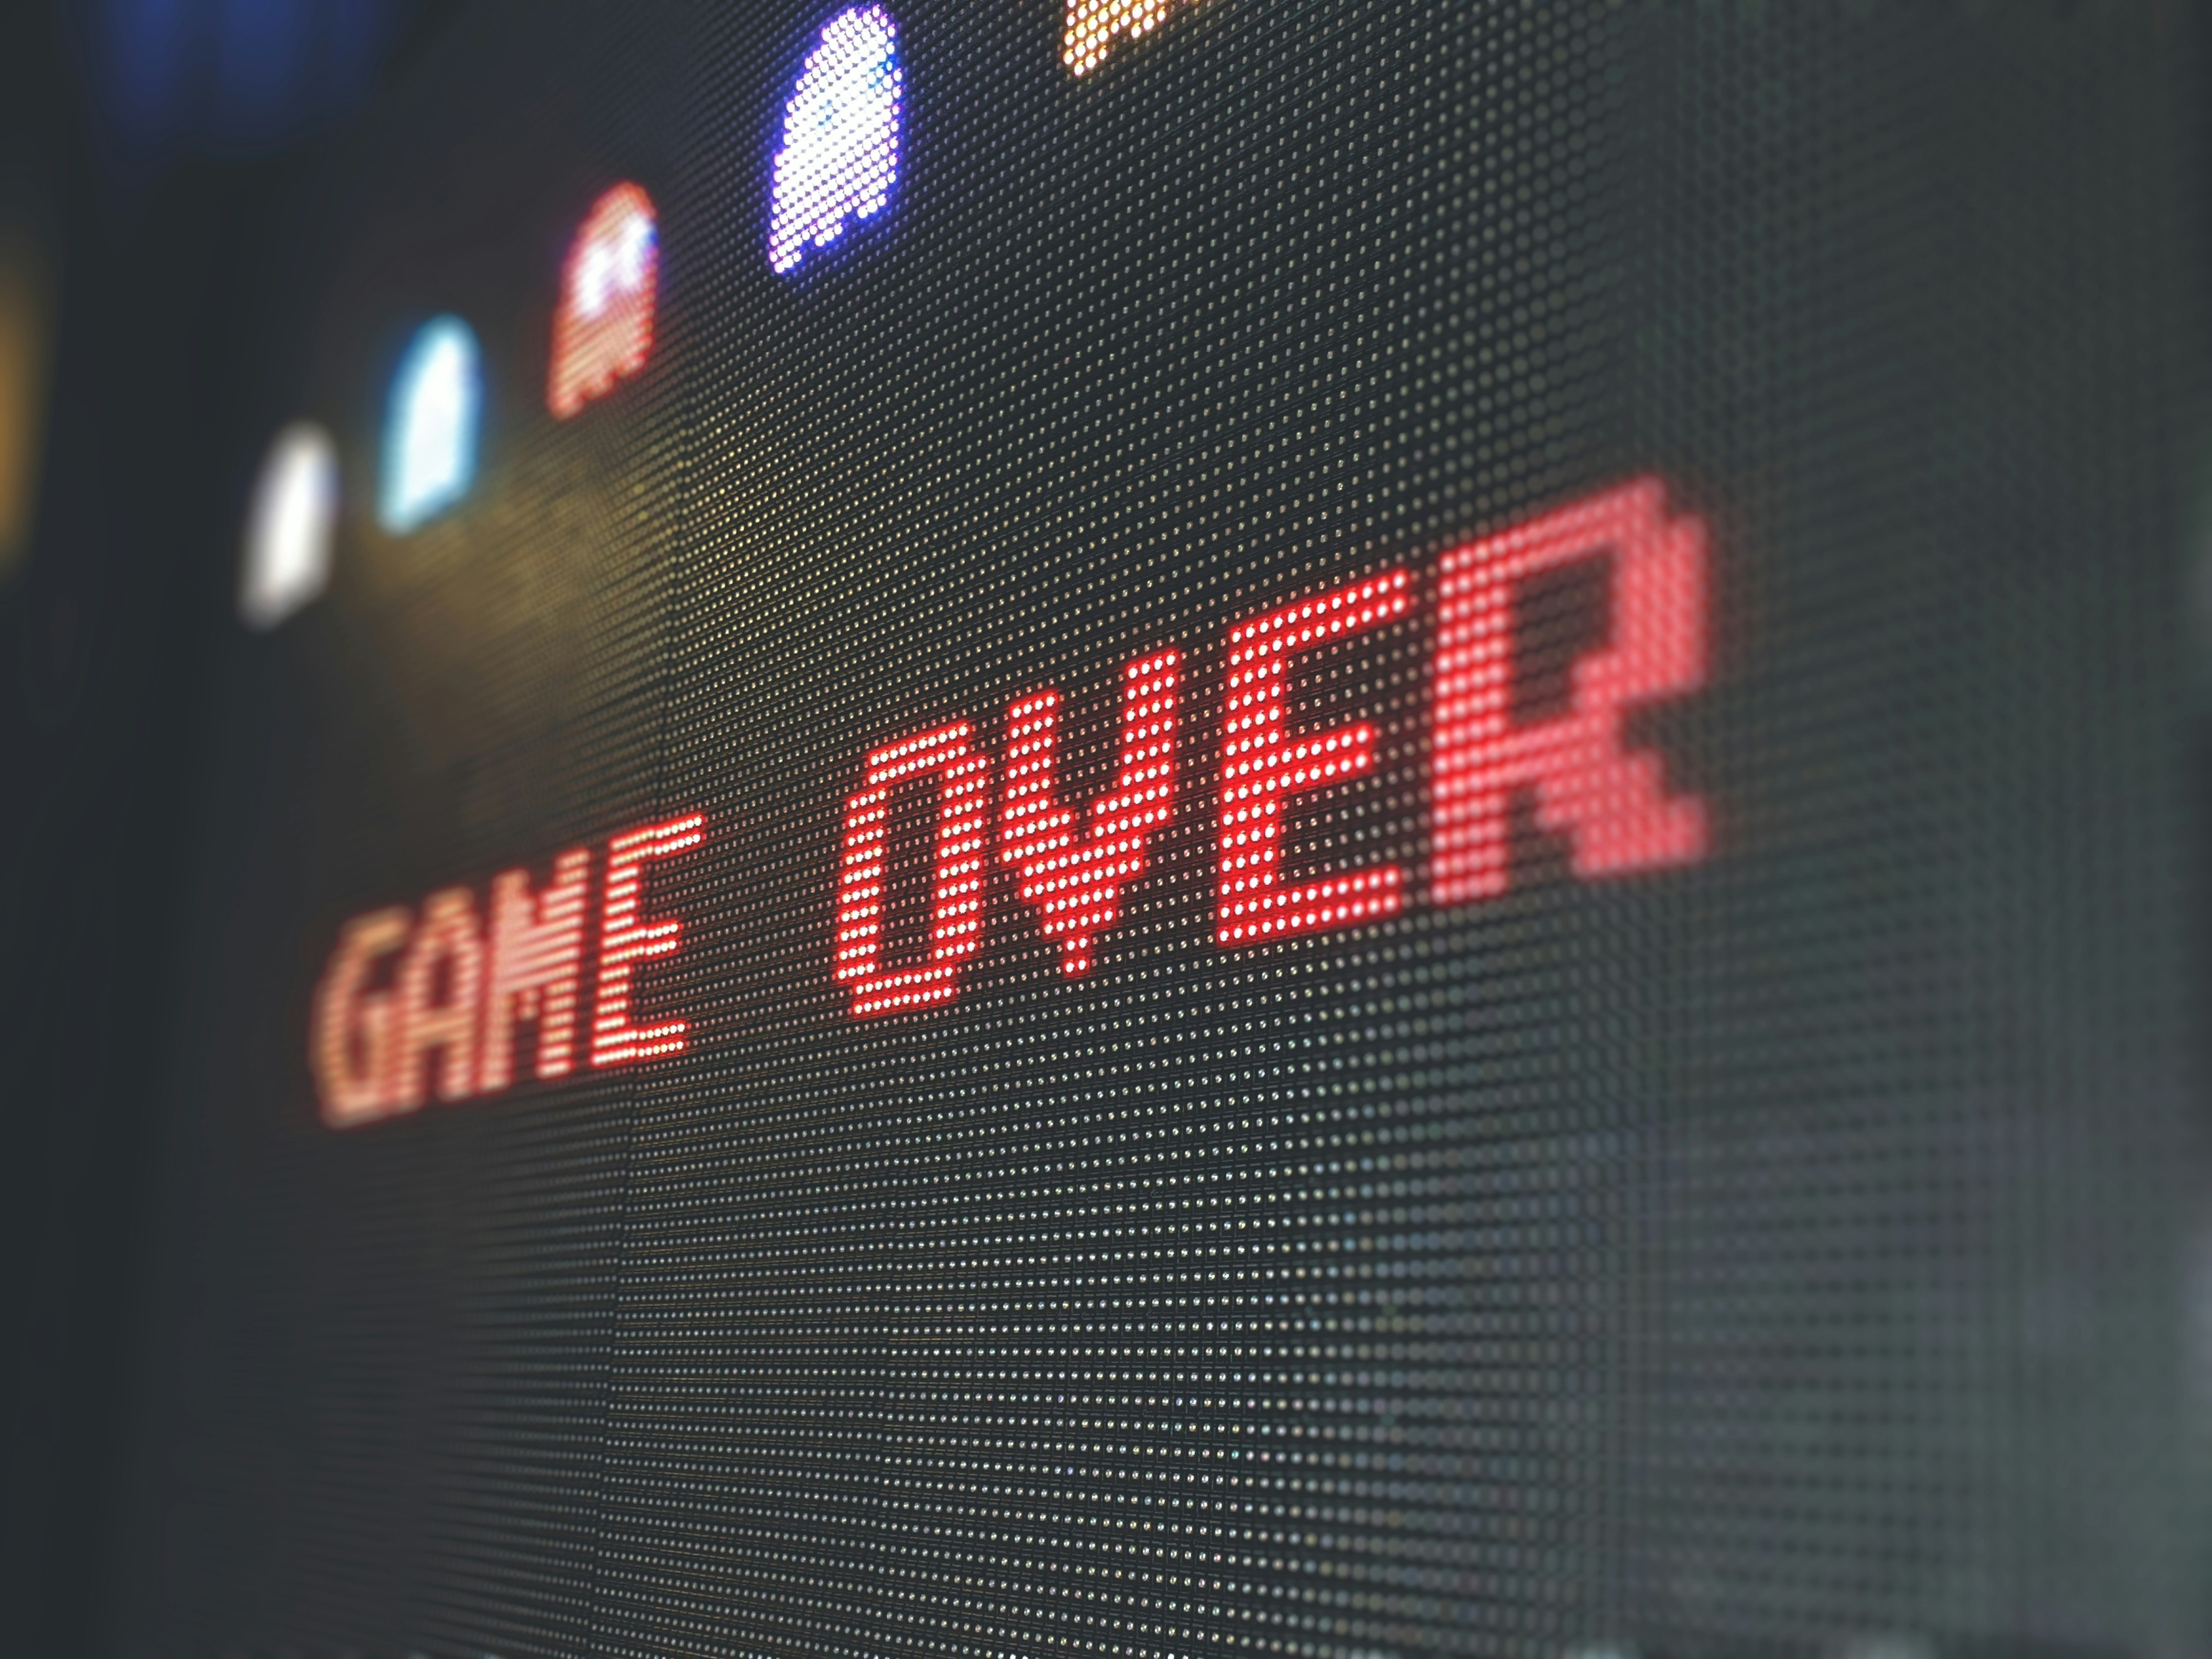 Game over written on a screen